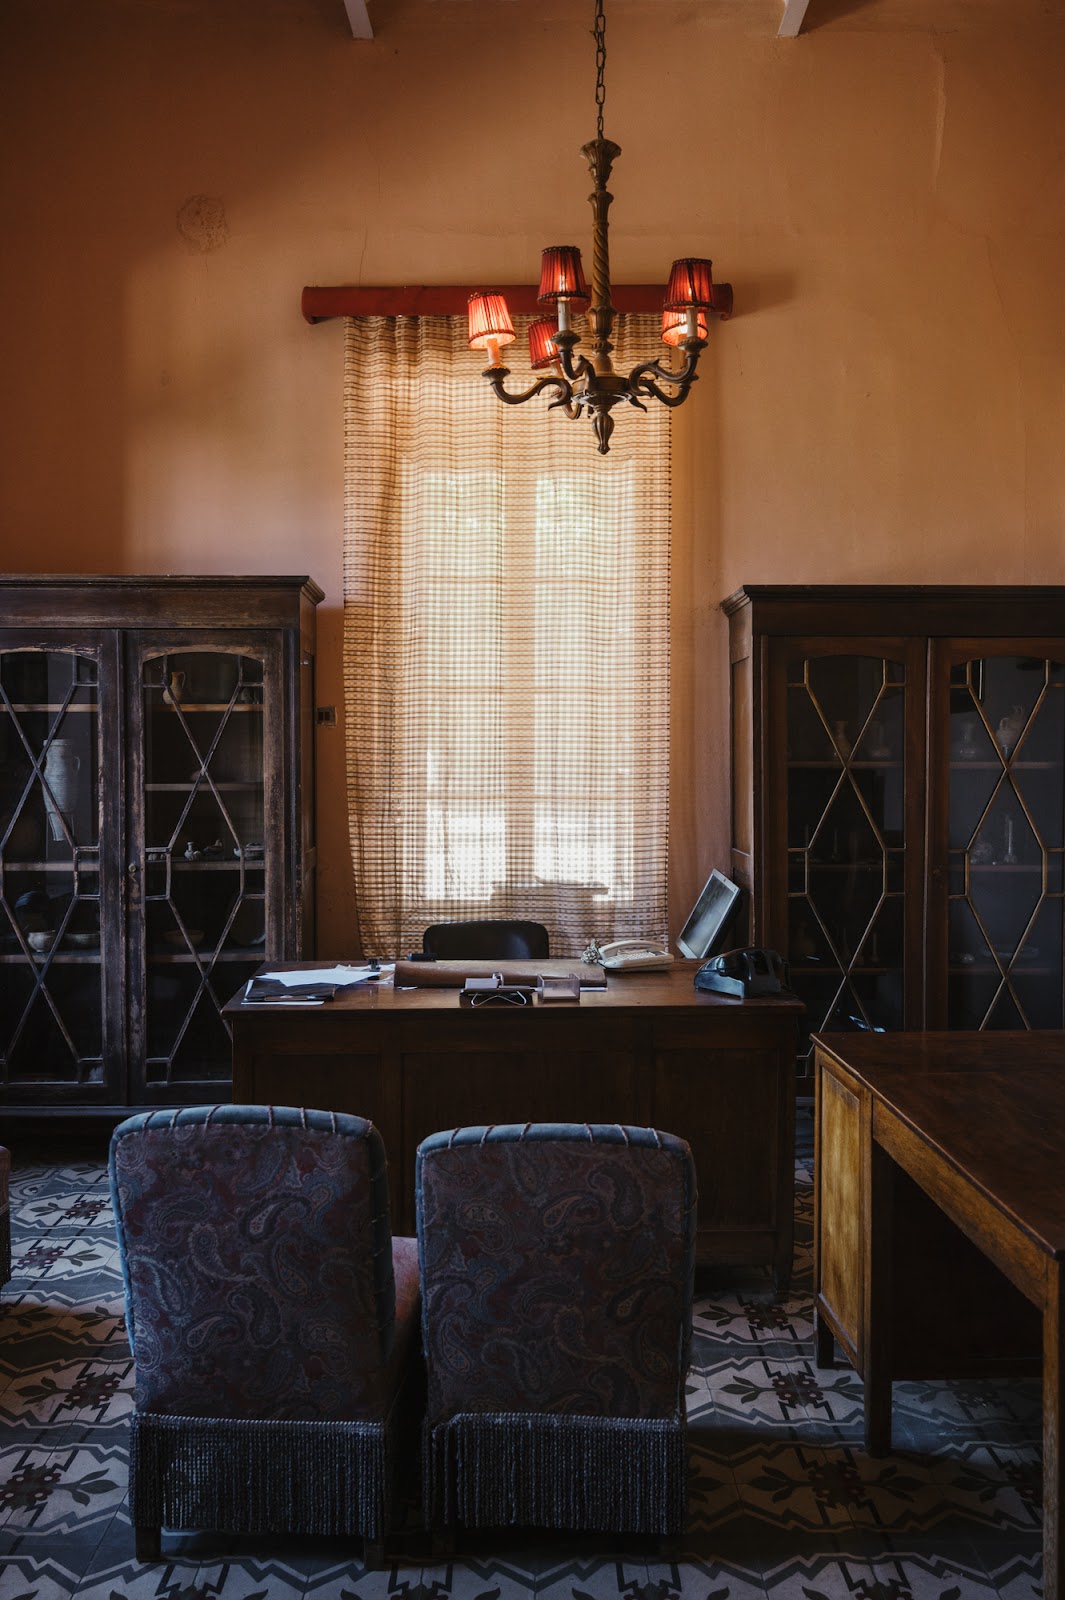 Ghassan’s office at the Hotel Palmyra.